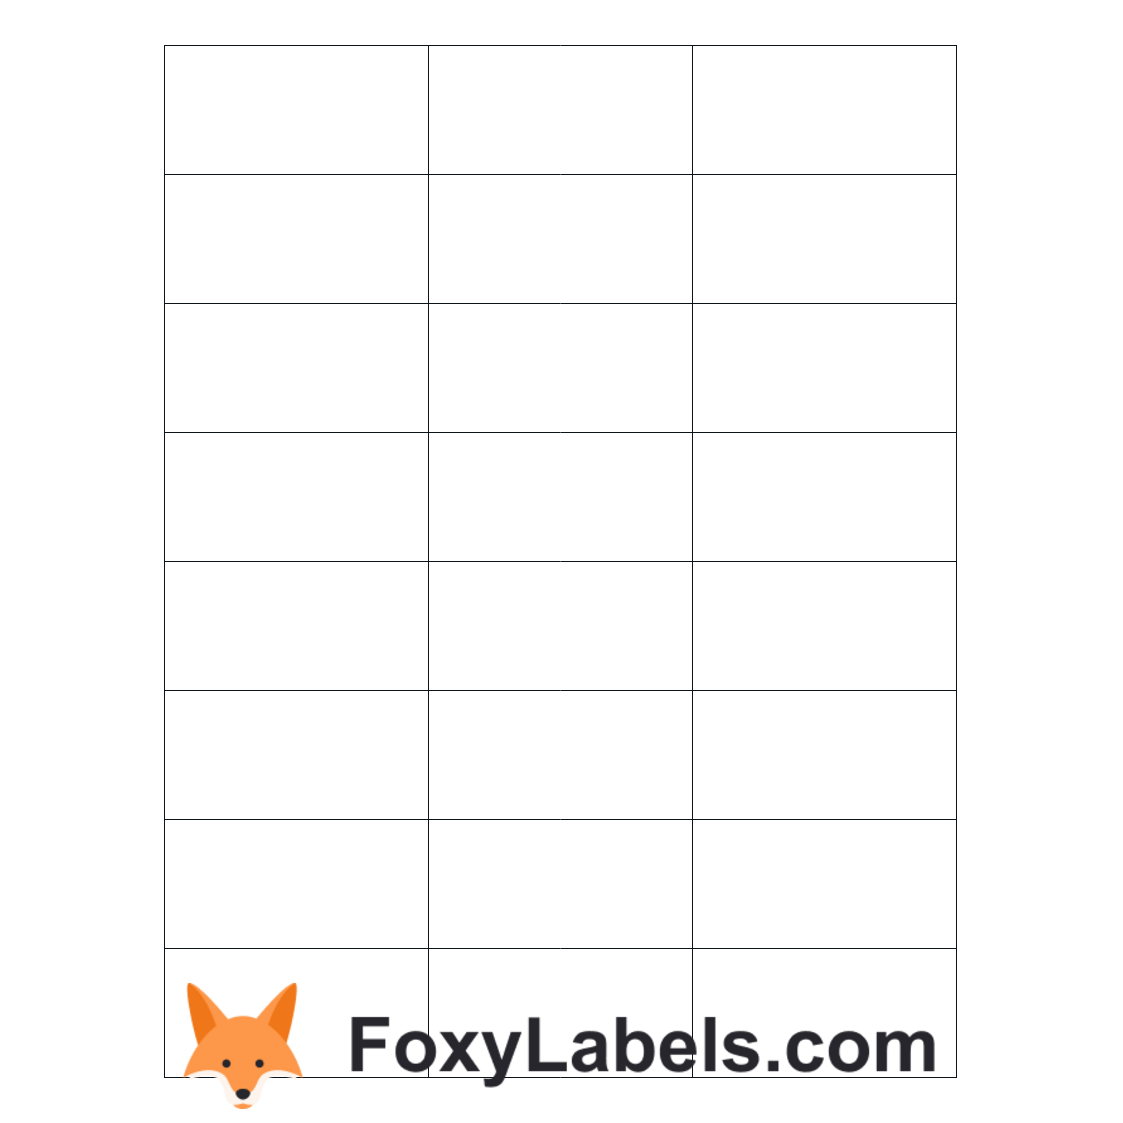 Herma 4263 label template for Google Docs